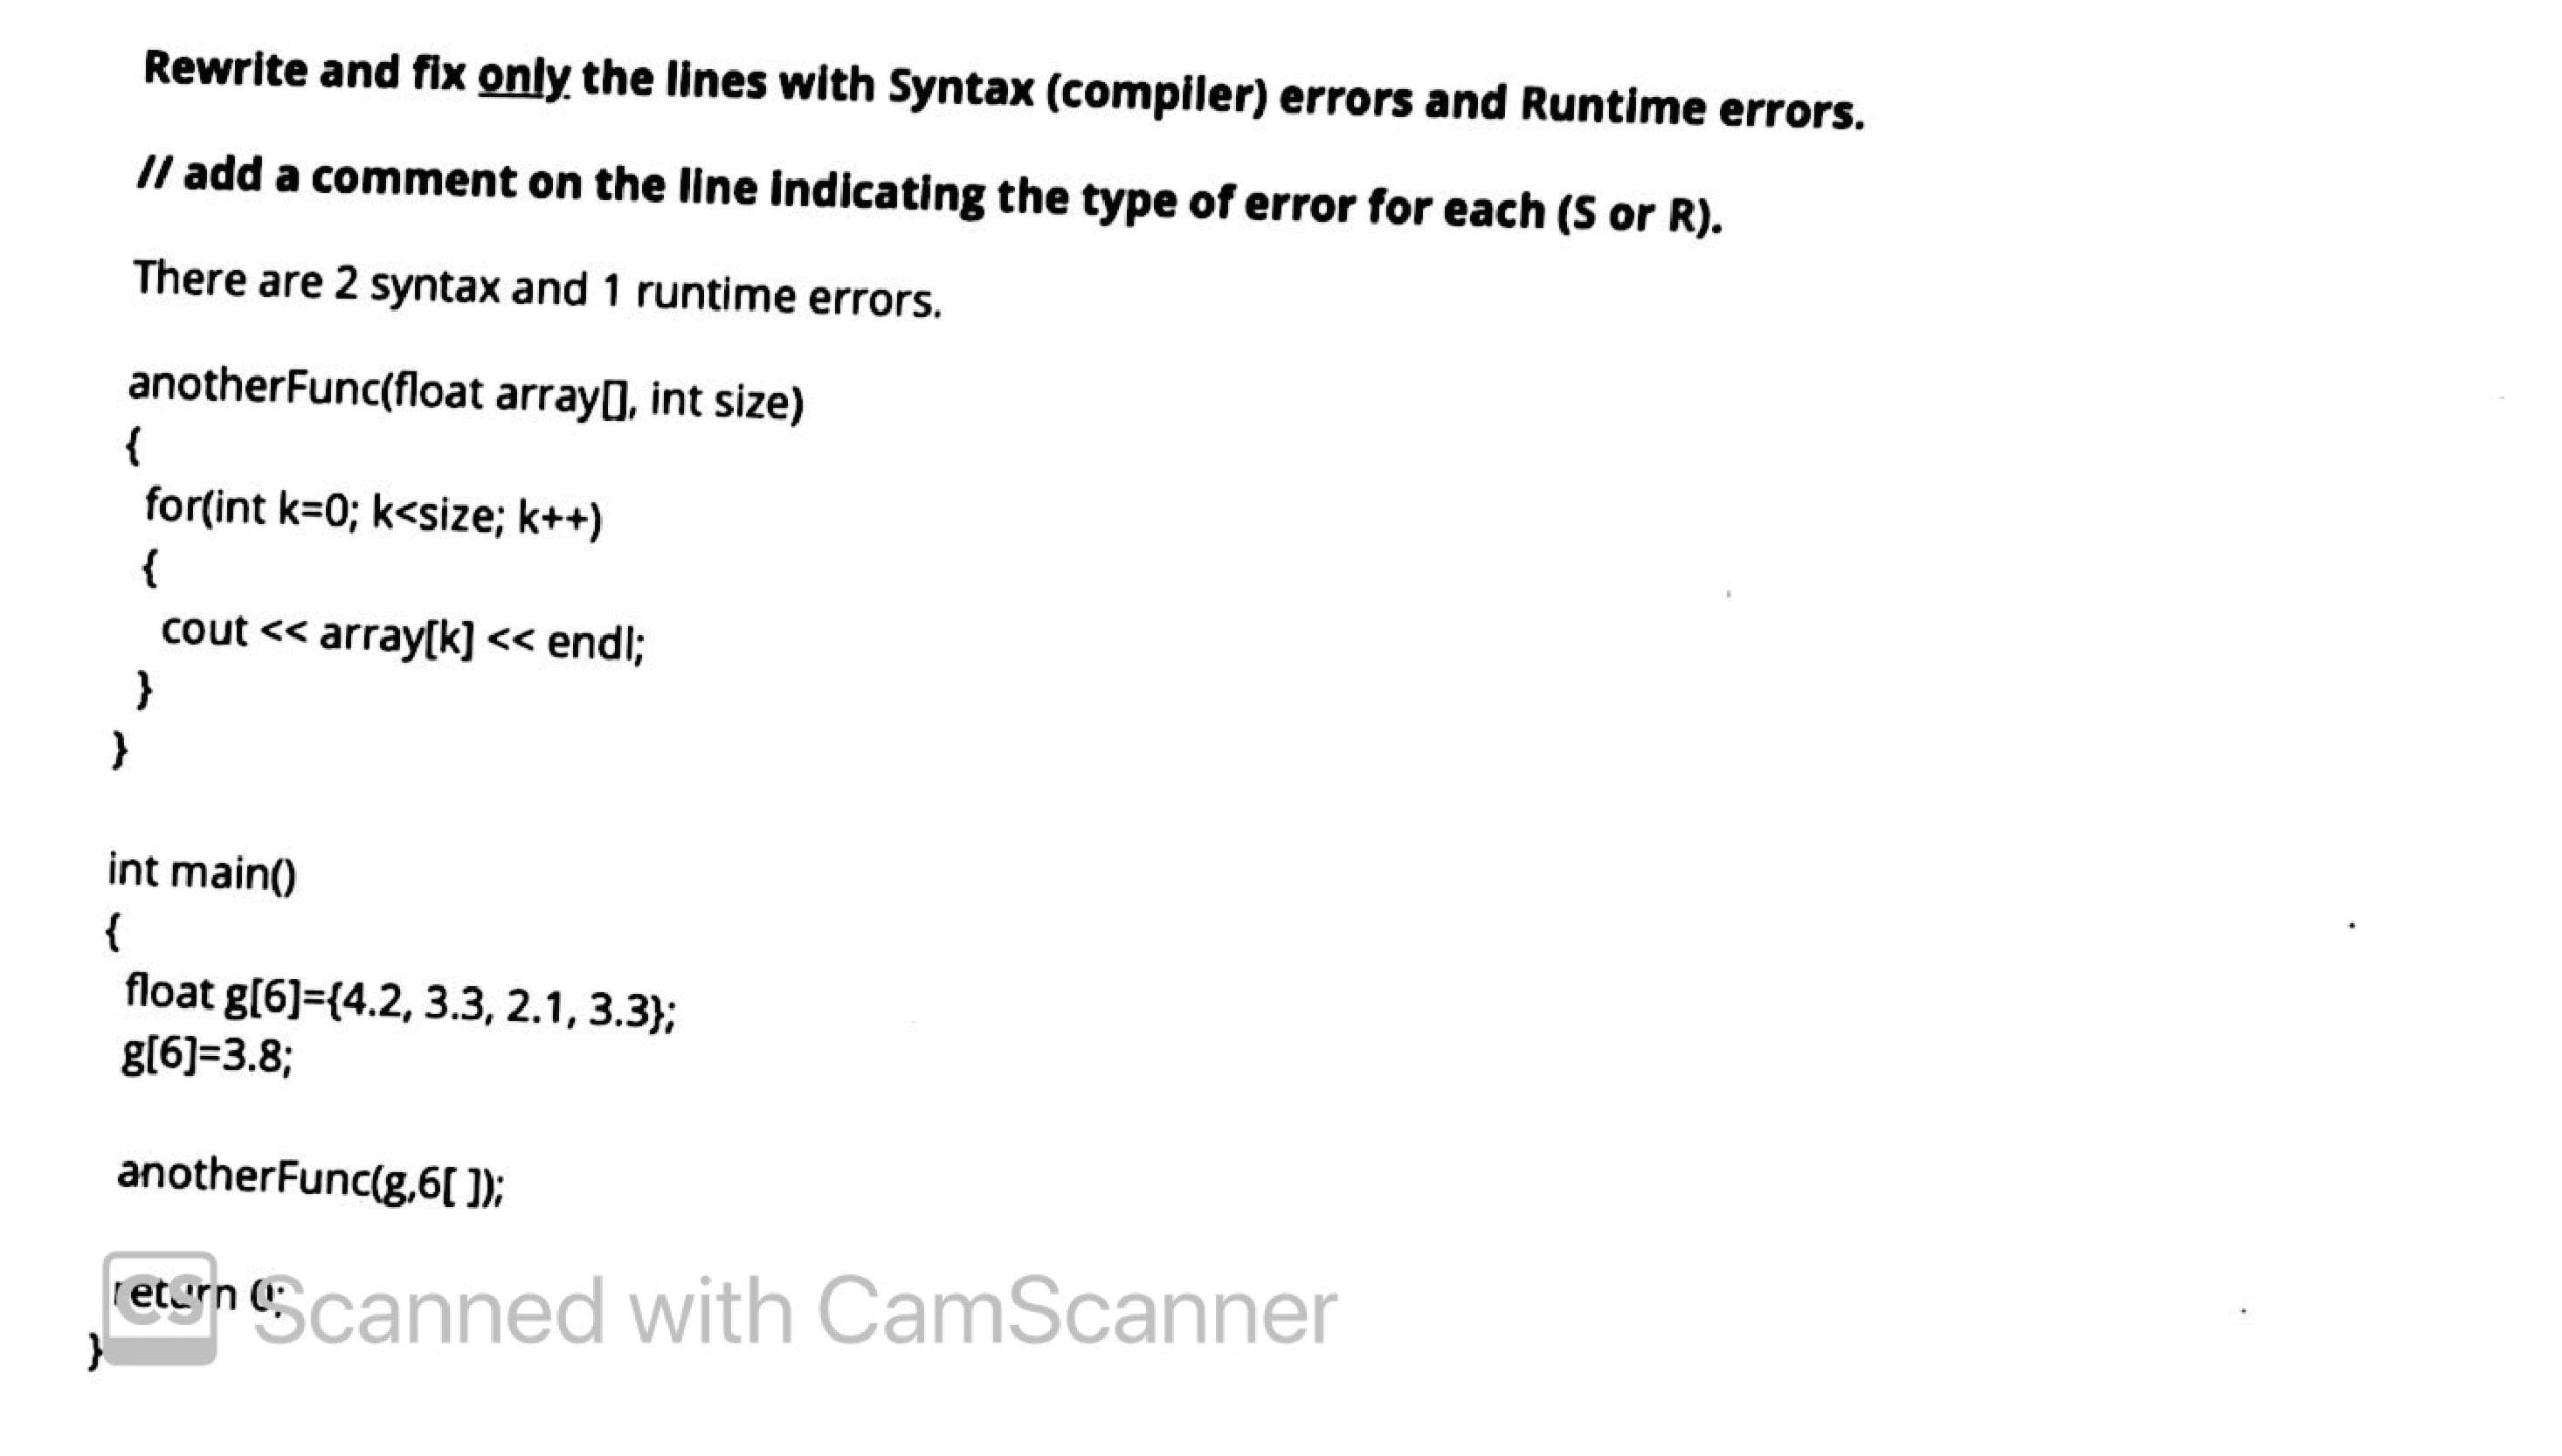 Rewrite and fix only the lines with Syntax (compiler) errors and Runtime errors.
/l add a comment on the line indicating the type of error for each (S or R).
There are 2 syntax and 1 runtime errors.
anotherFunc(float arrayg, int size)
{
for(int k=0; k<size; k++)
{
cout << array[k] << endl;
}
int main()
{
float g[6]={4.2, 3.3, 2.1, 3.3};
g(6]=3.8;
anotherFunc(g,6[ );
egn Ecanned with CamScanner
